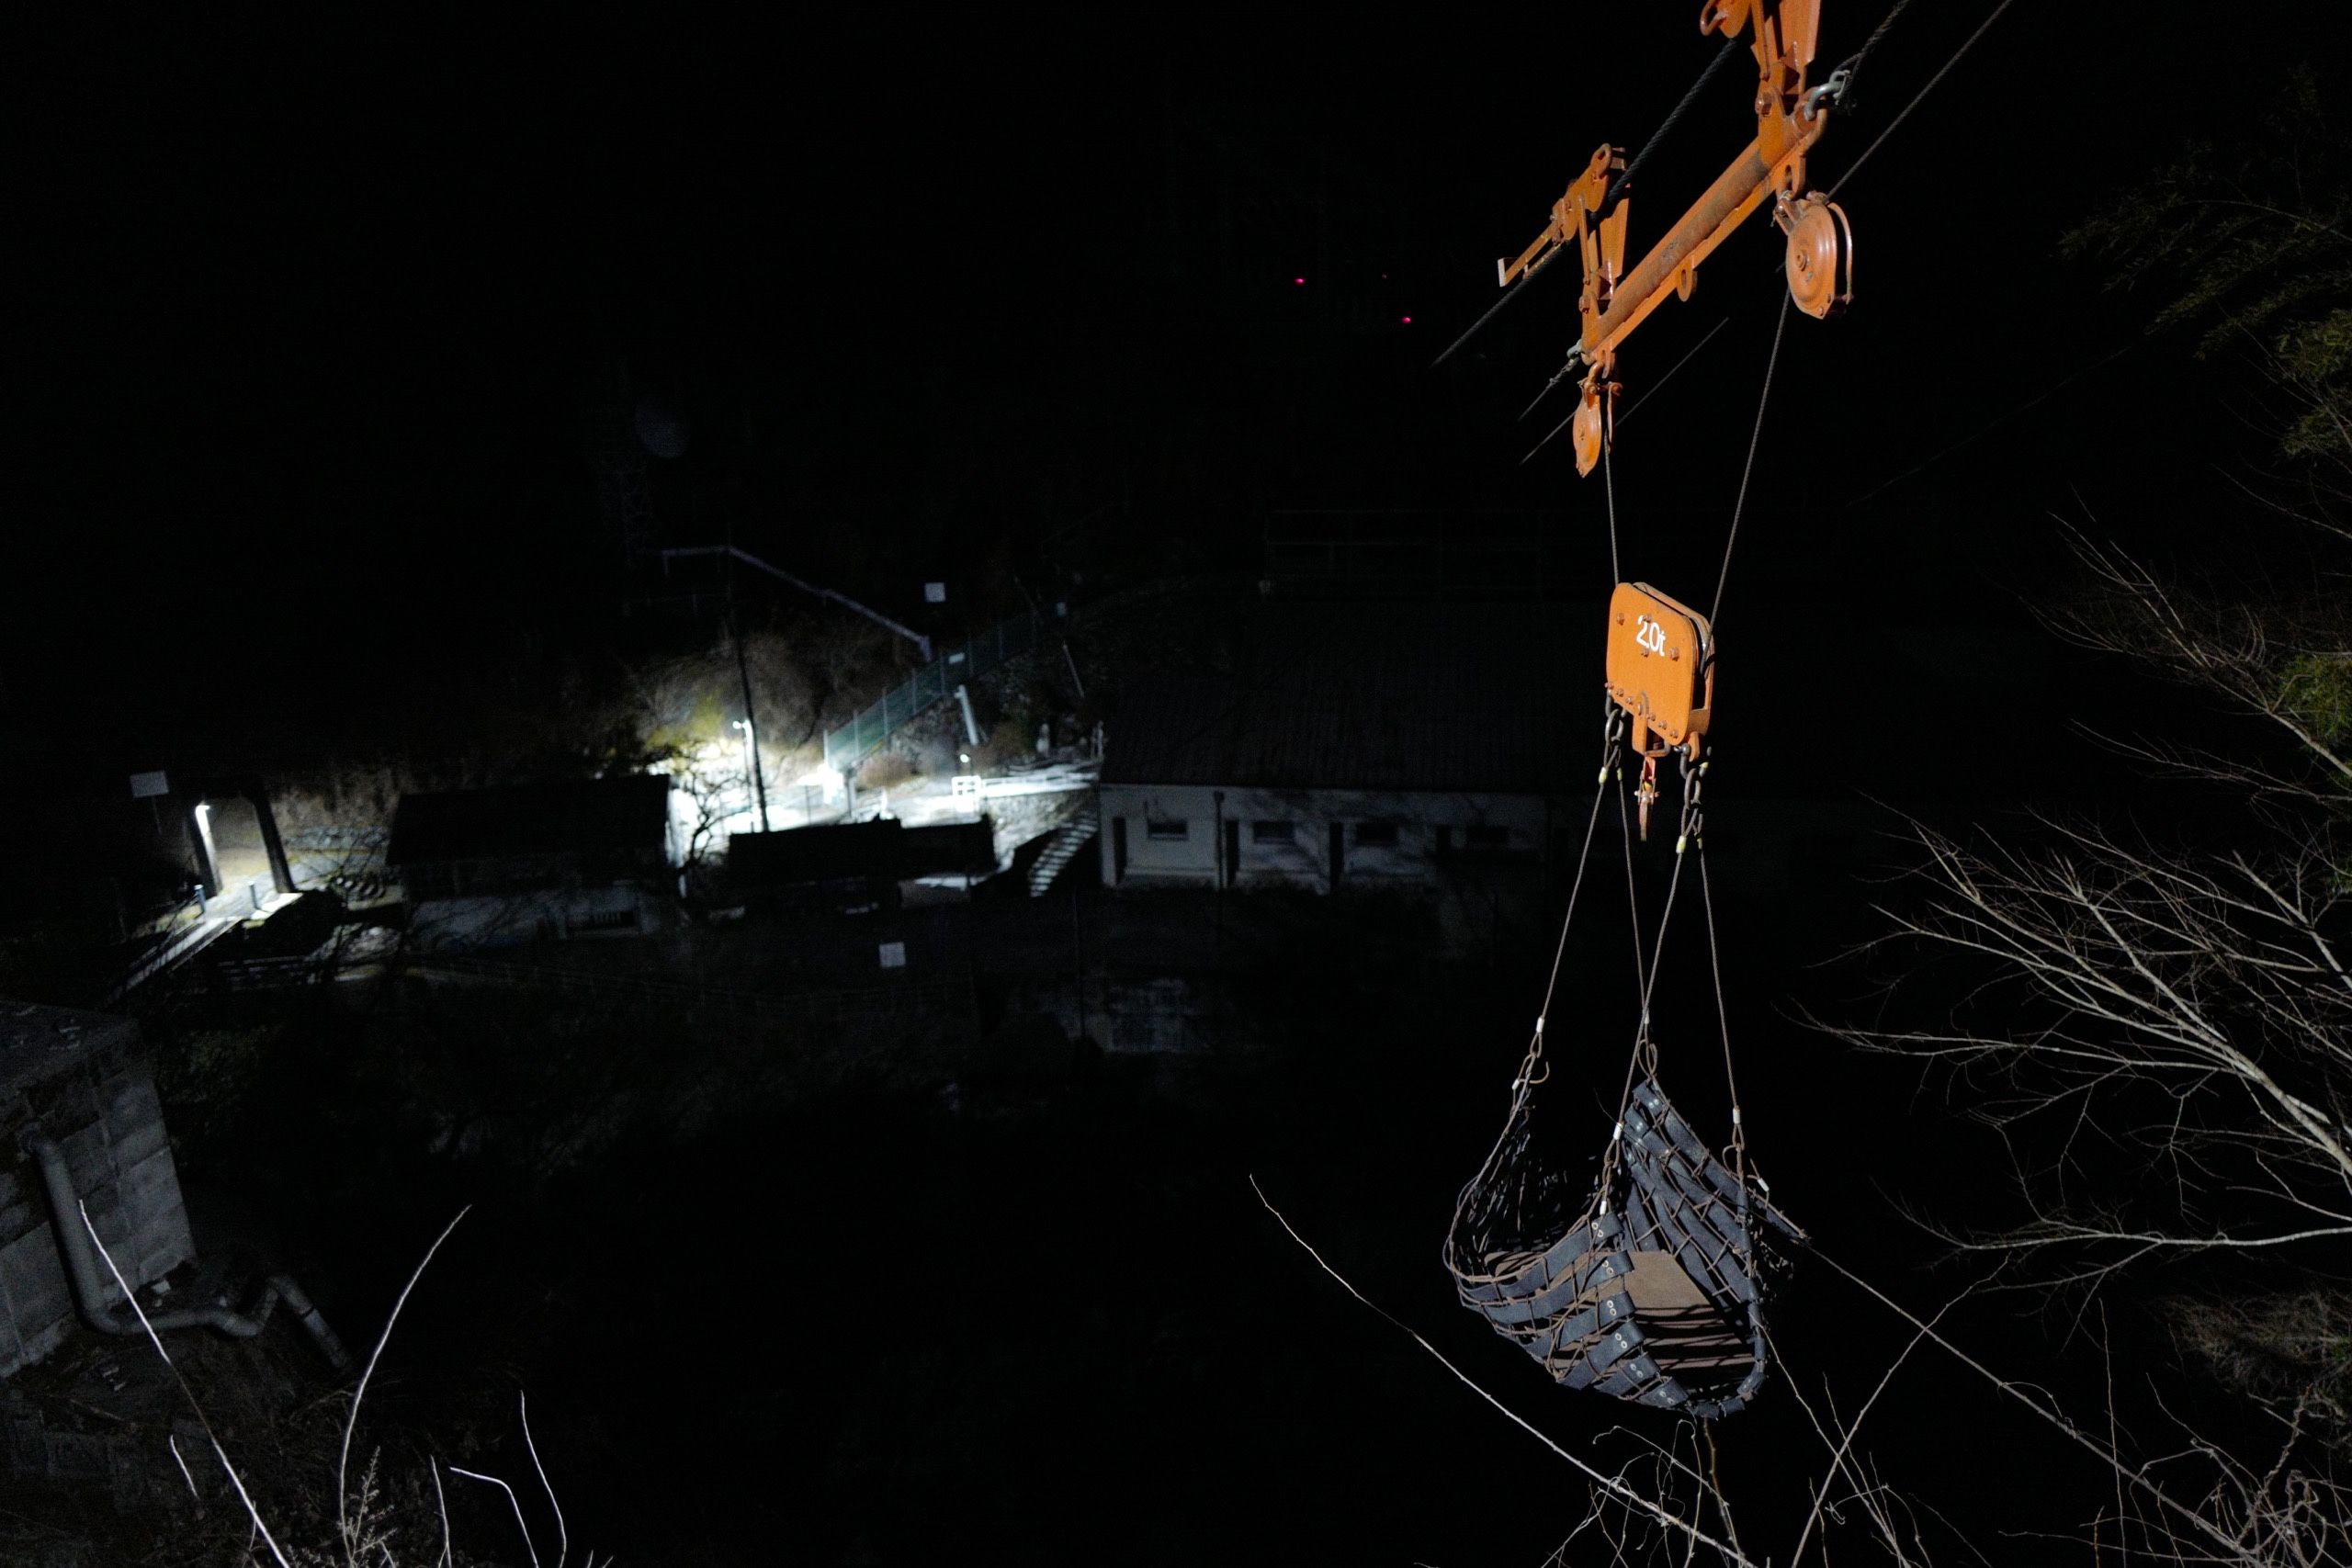 A sling on a system of cable suspended above a dark river in the night.